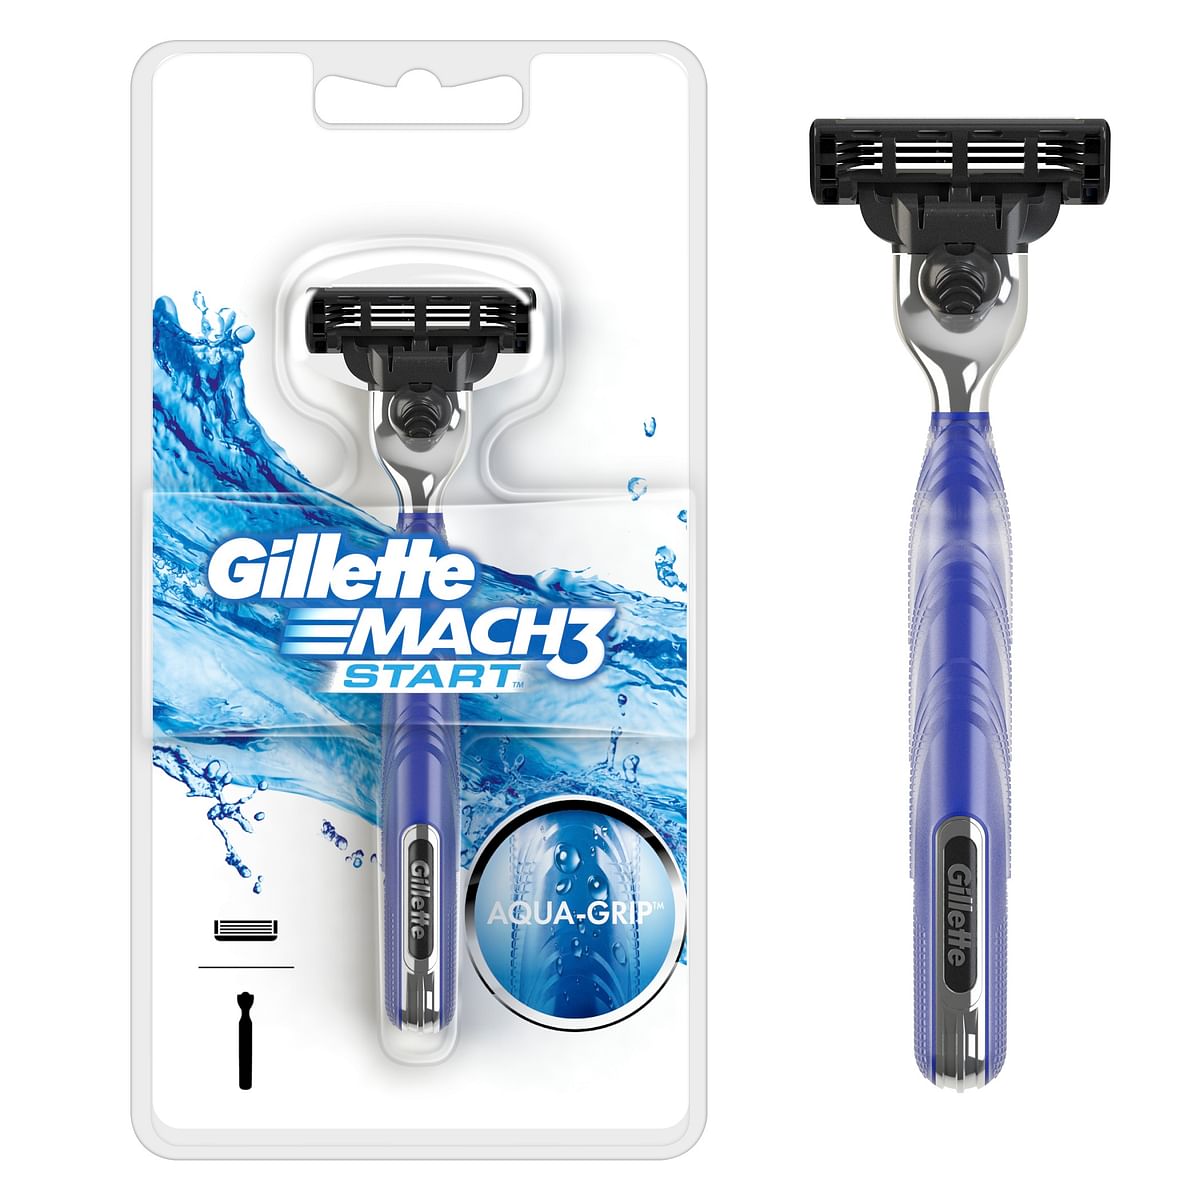 The newest addition to the Gillette Mach 3 family is here